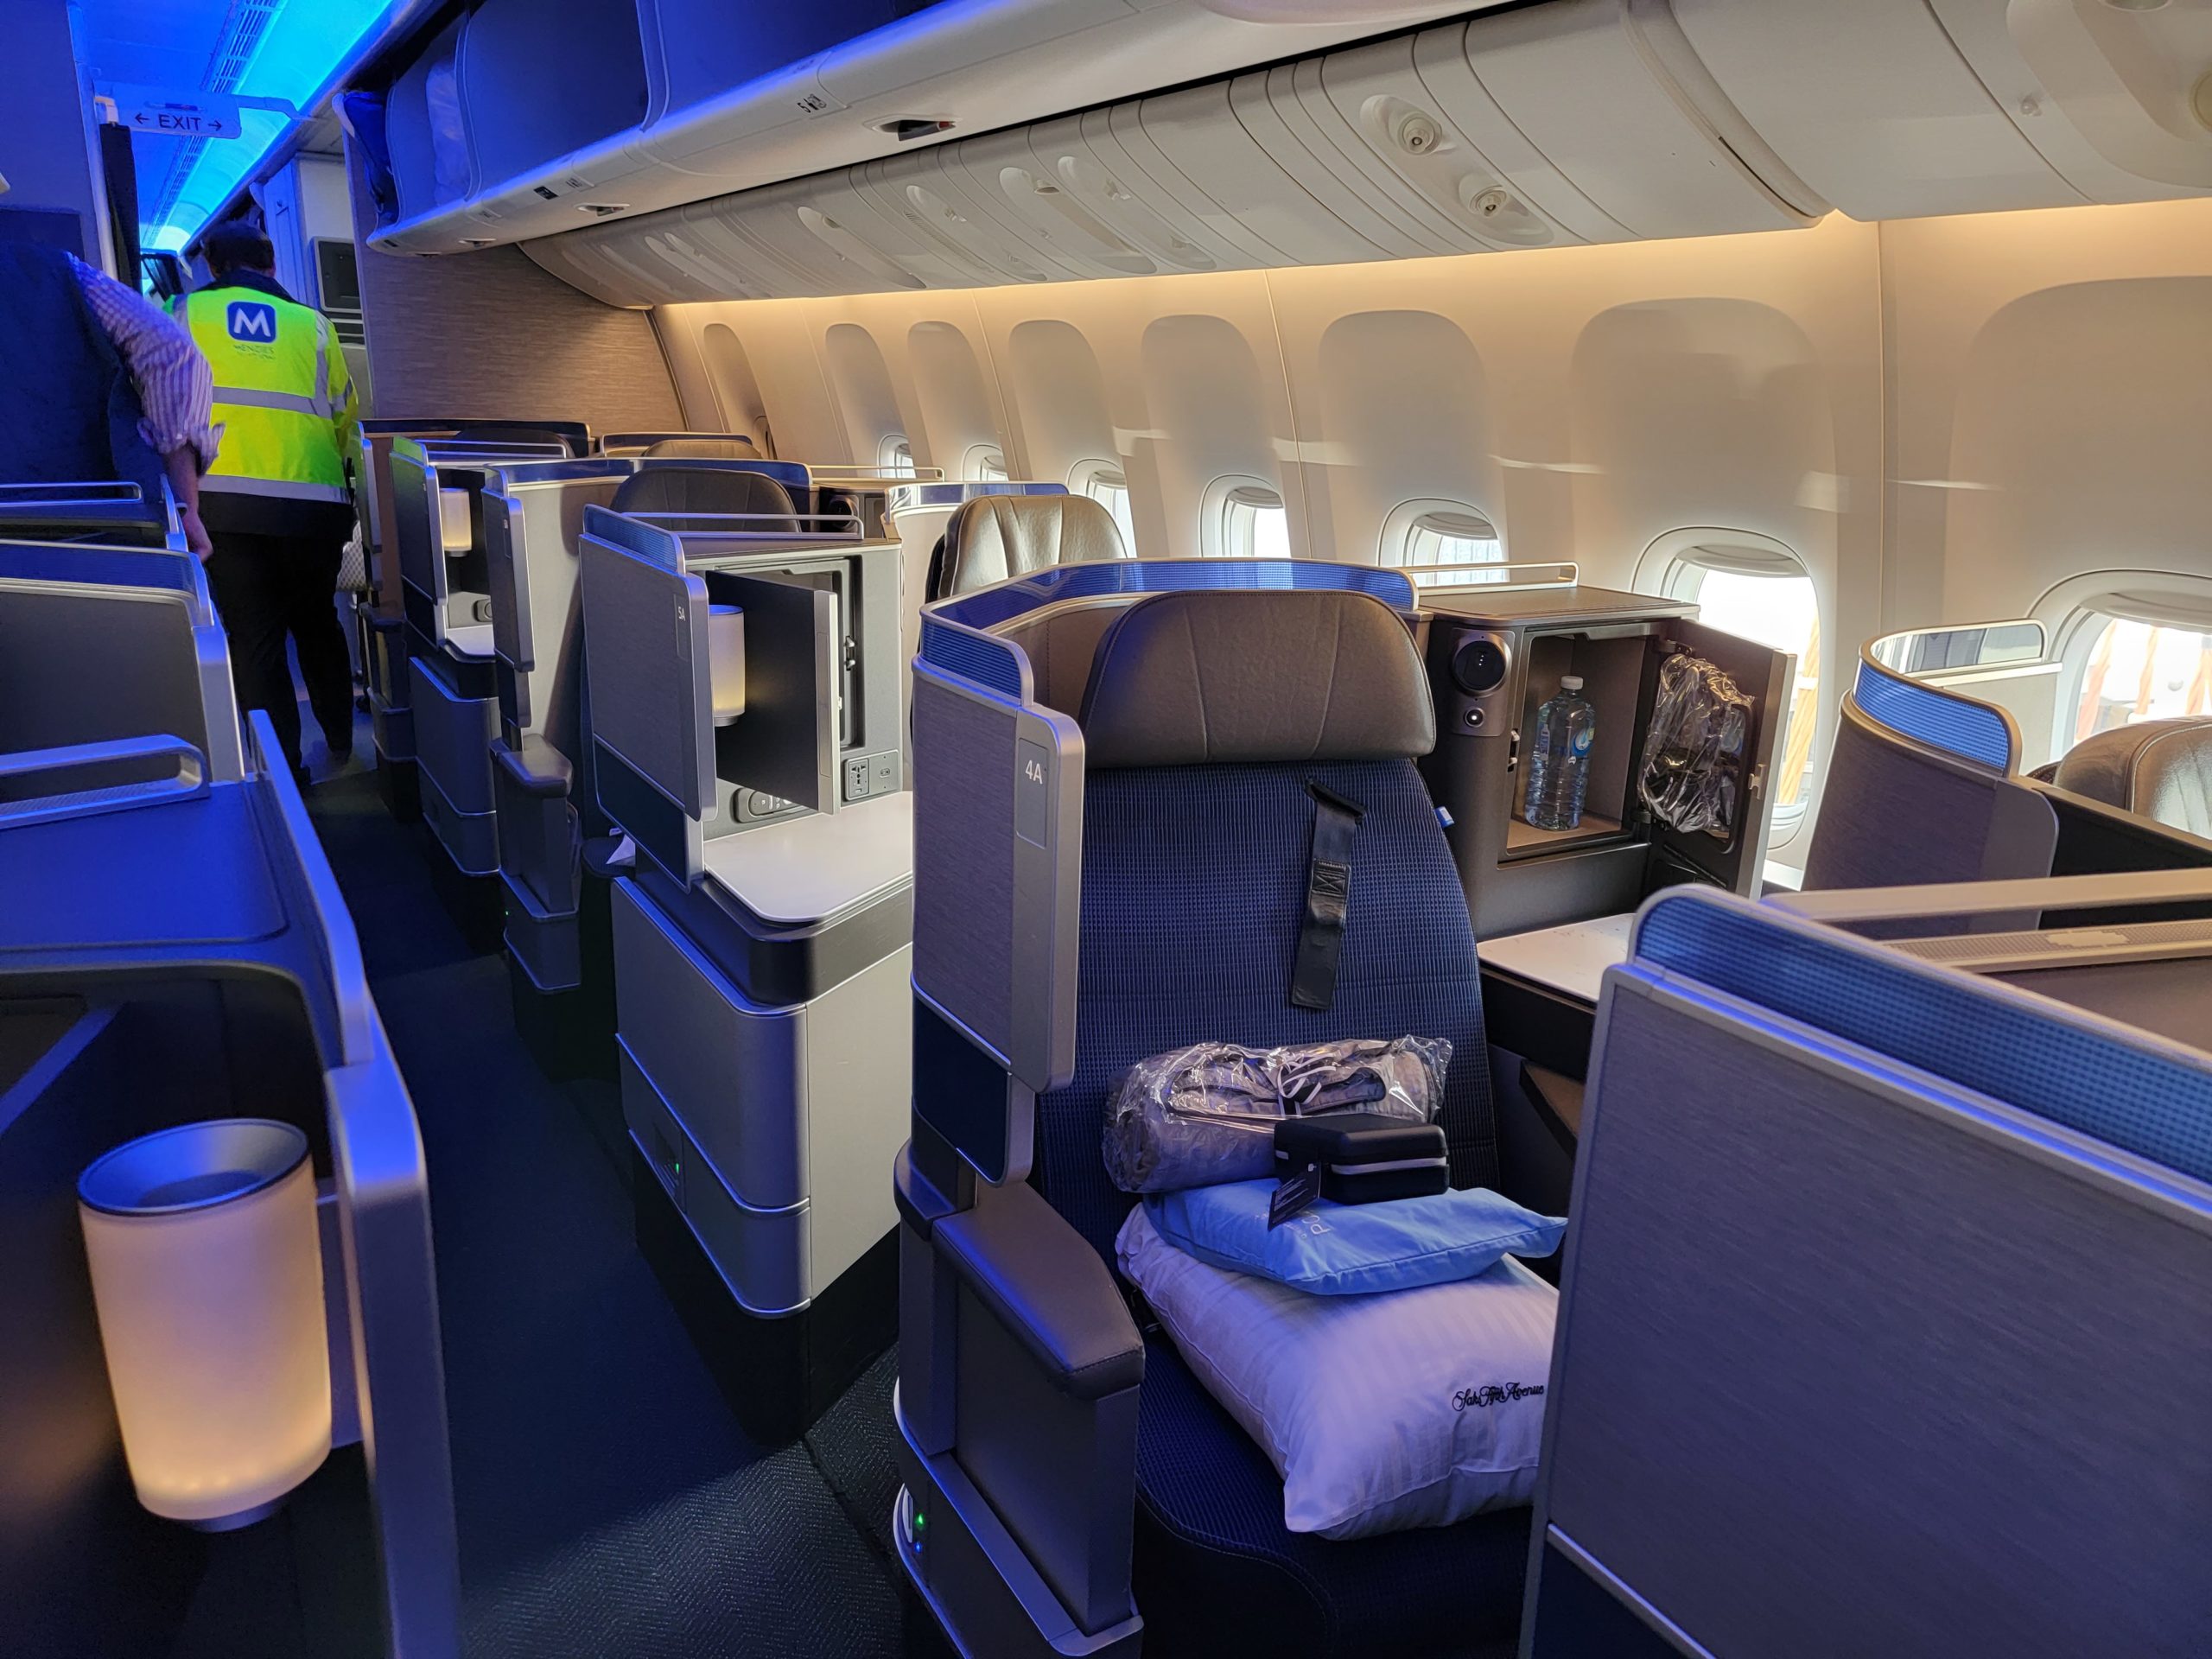 viewfromthewing.com - Gary Leff - United Airlines Is Letting Customers Test New Business Class Suites With Doors